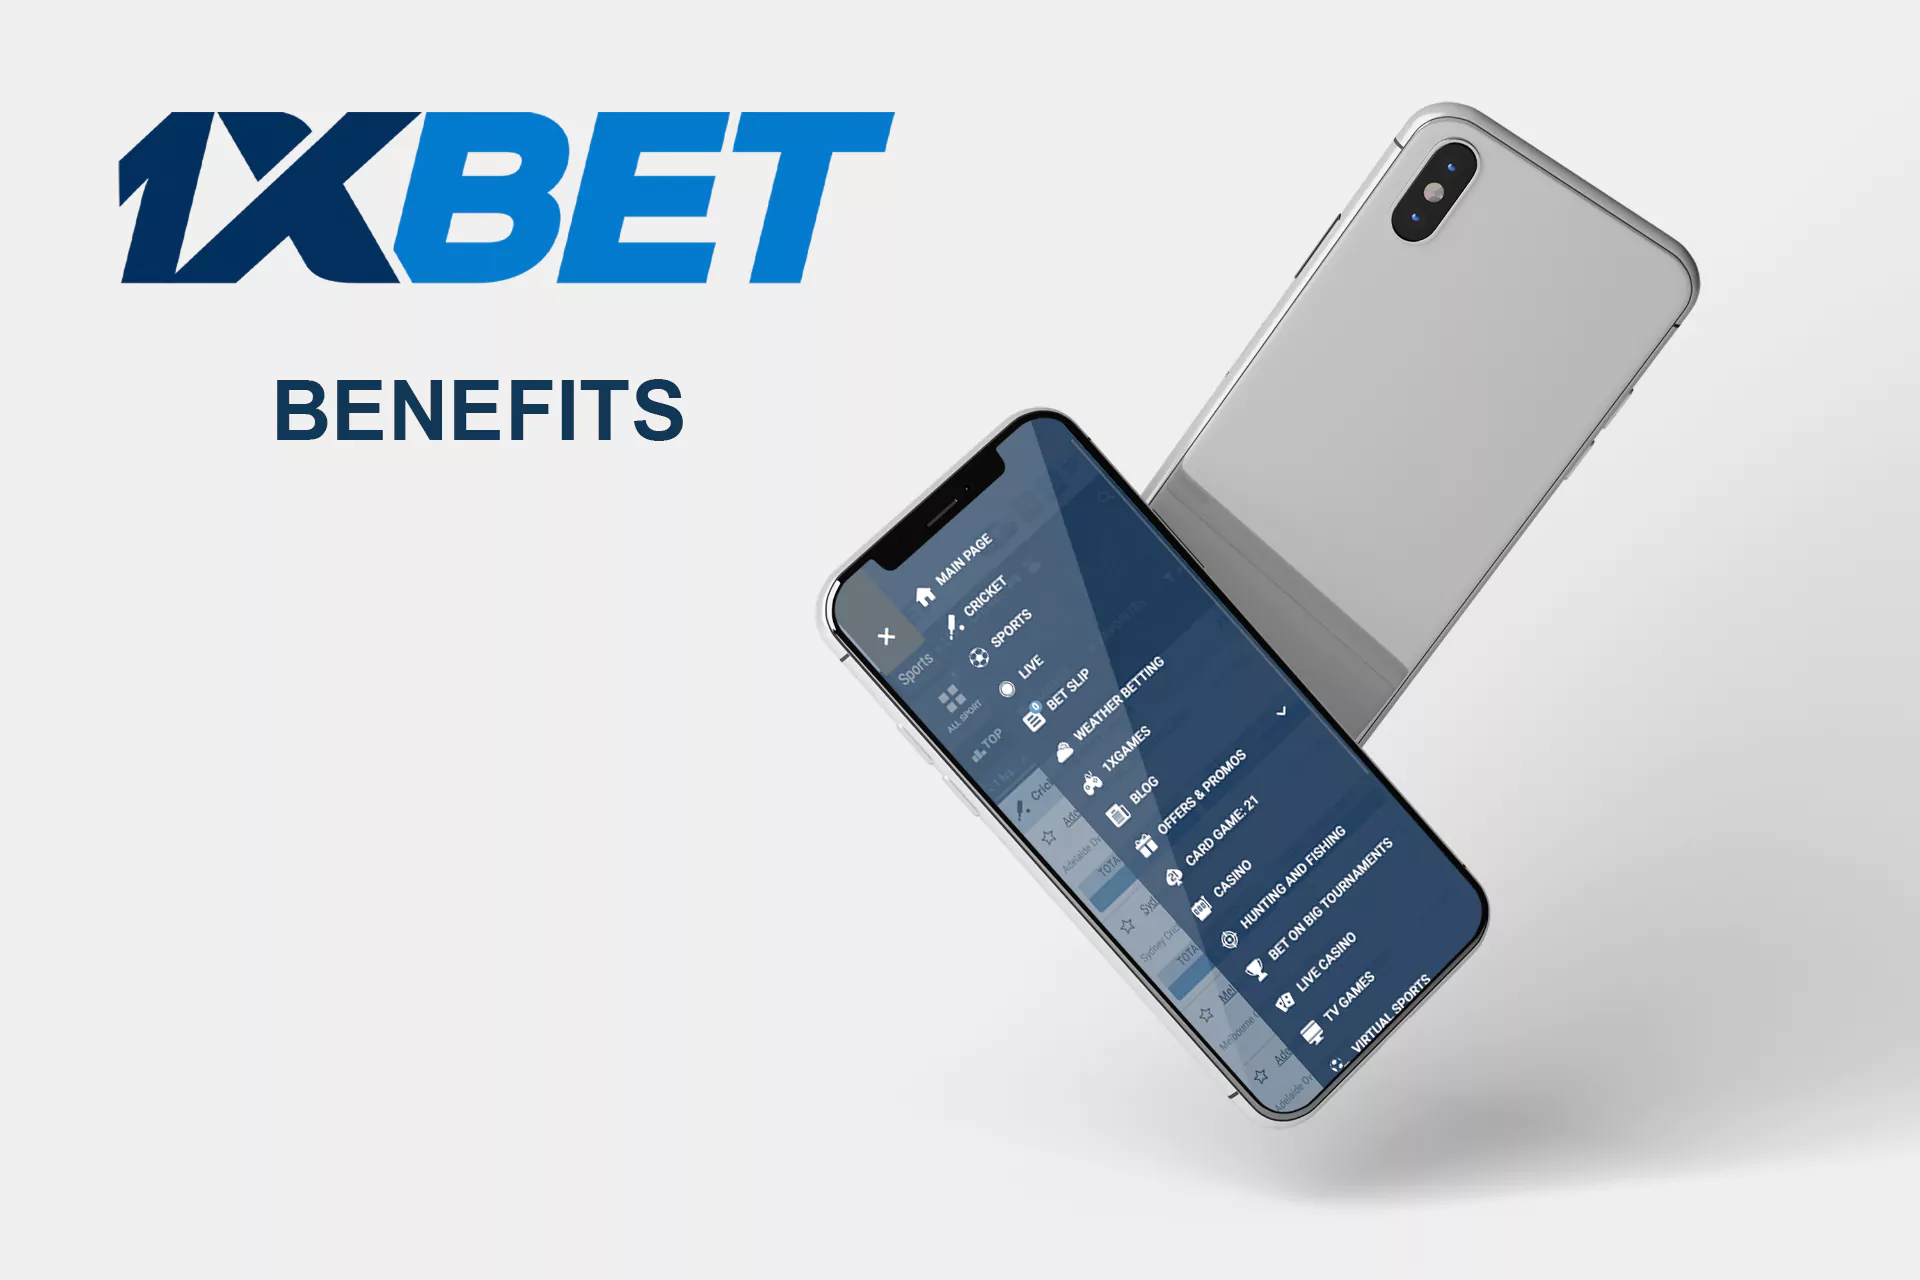 Using the 1xBet app you can easily place bets from anywhere, make deposits and withdraw your winnings, and contact customer support.